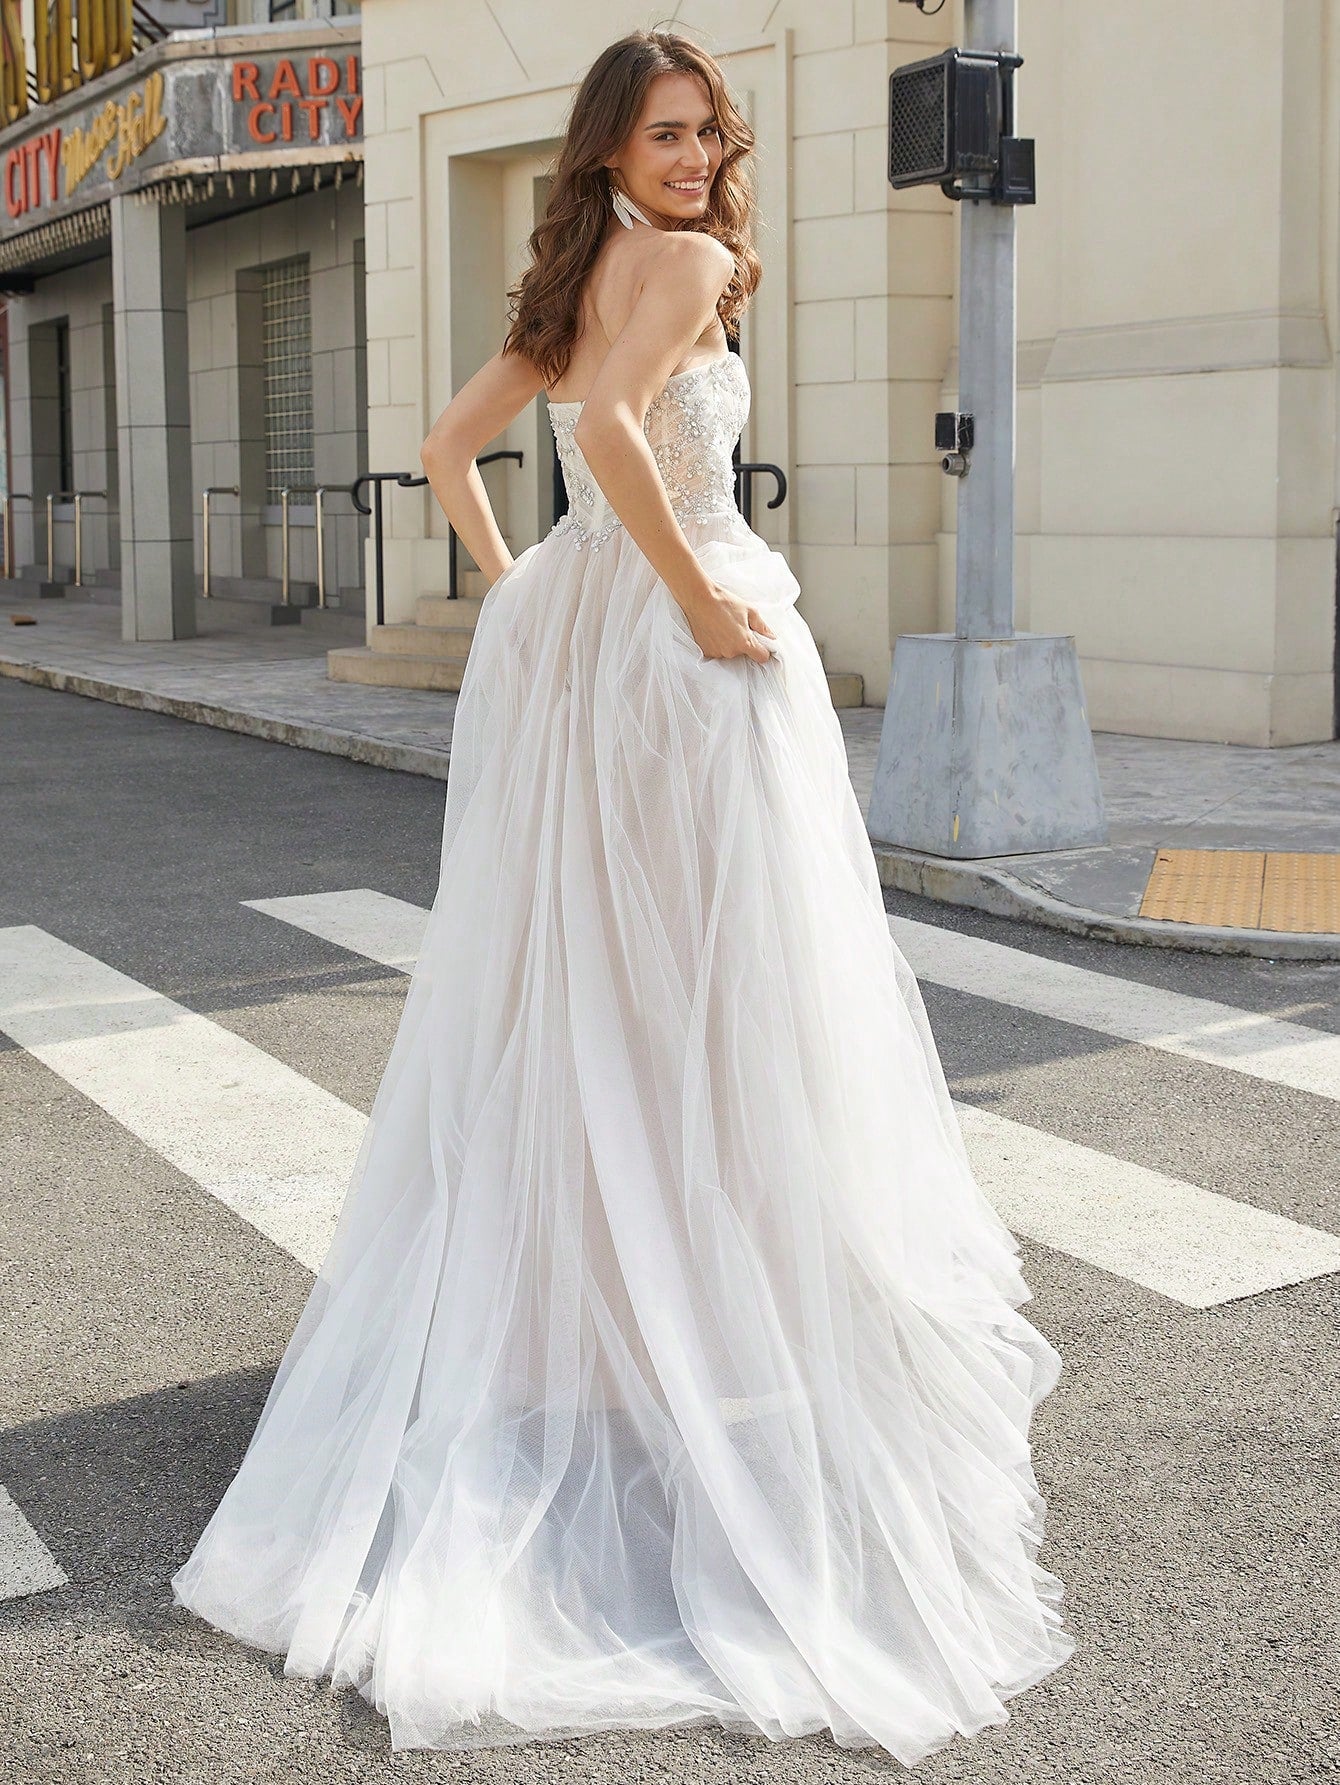 Elegant Strapless Bridal Gown with Sequin Embellishments and High-Slit Tulle Skirt